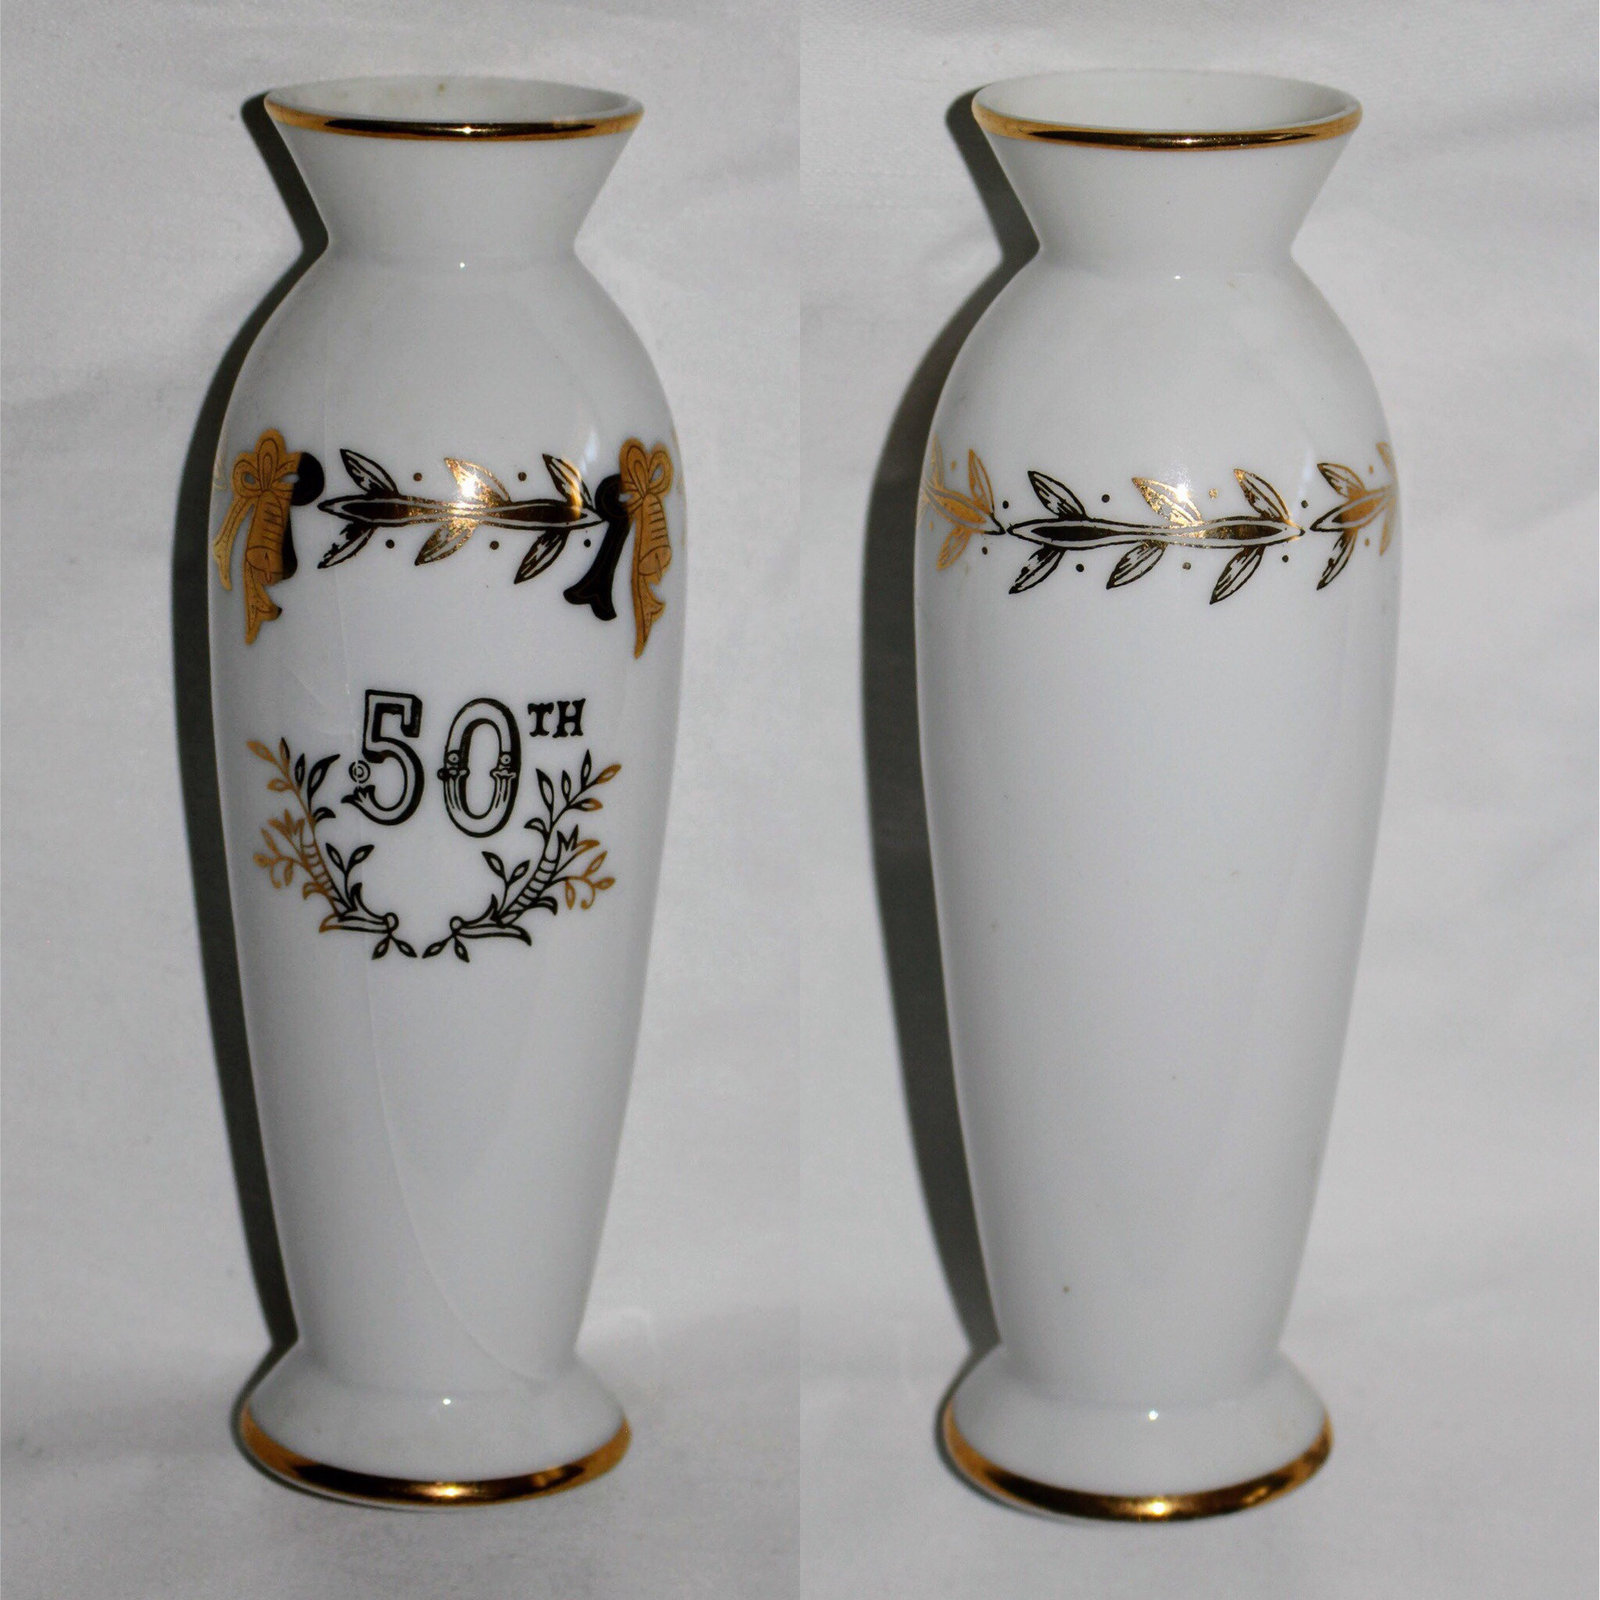 Primary image for Vintage Lefton China Vase 50th Anniversary 4655